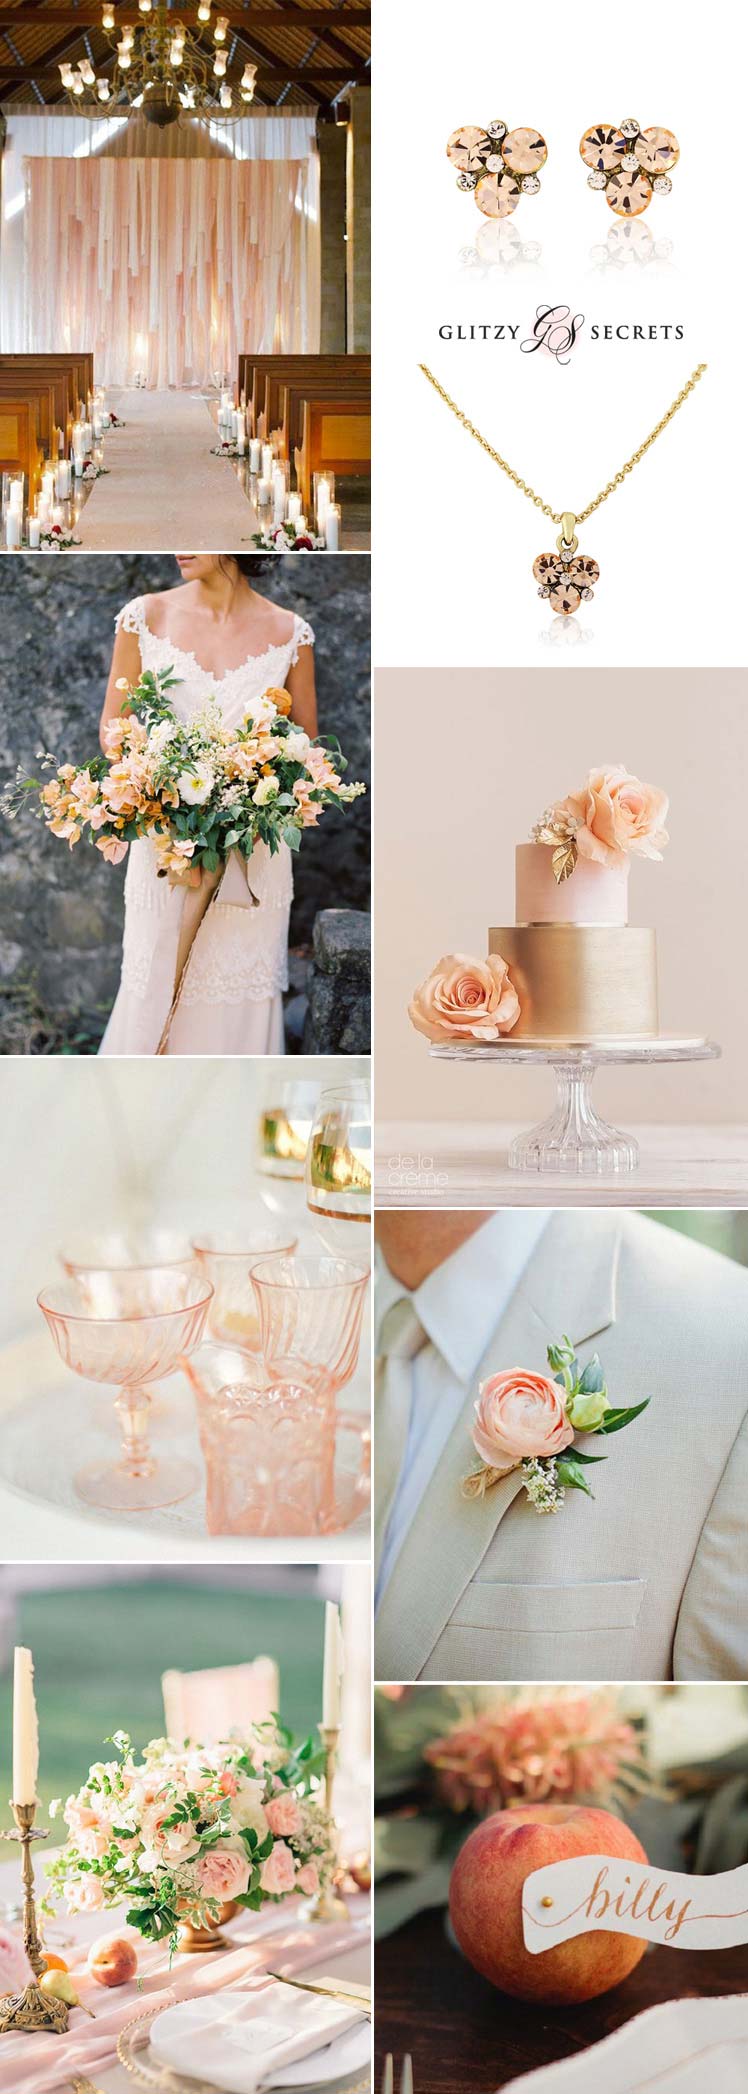 Gold and peach wedding theme inspiration